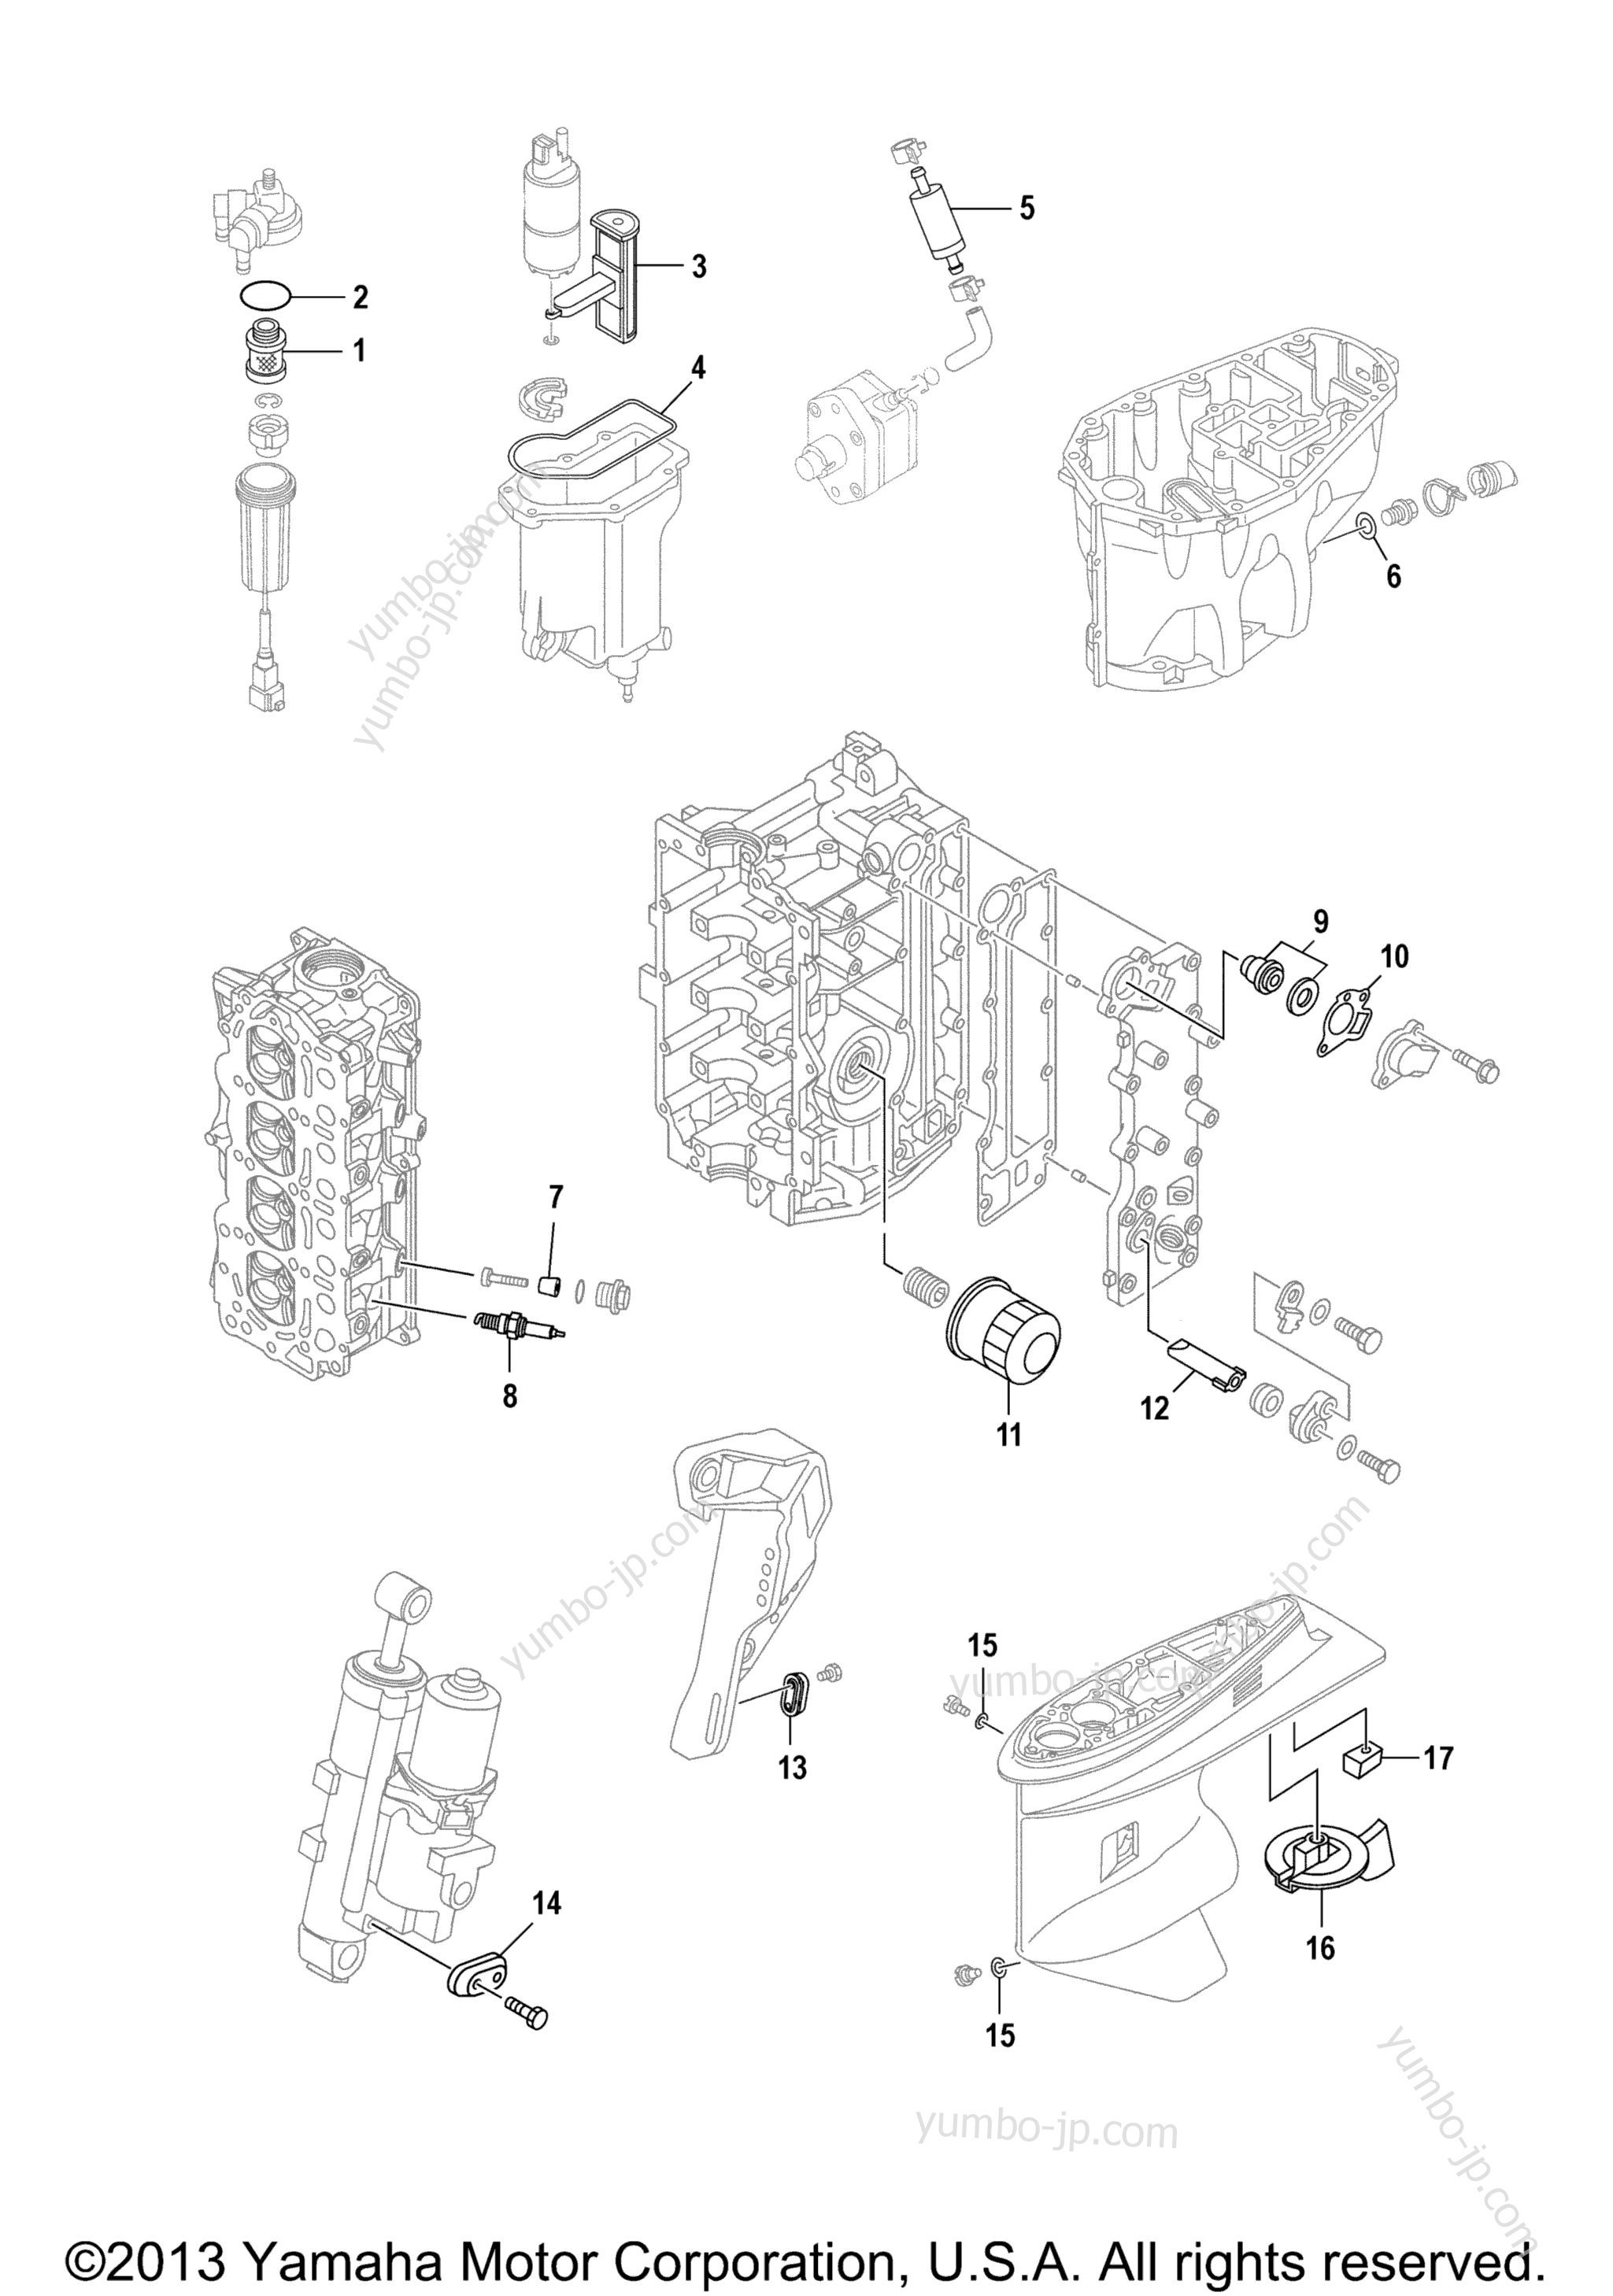 Scheduled Service Parts for outboards YAMAHA F60LHA_011 (0112) 2006 year